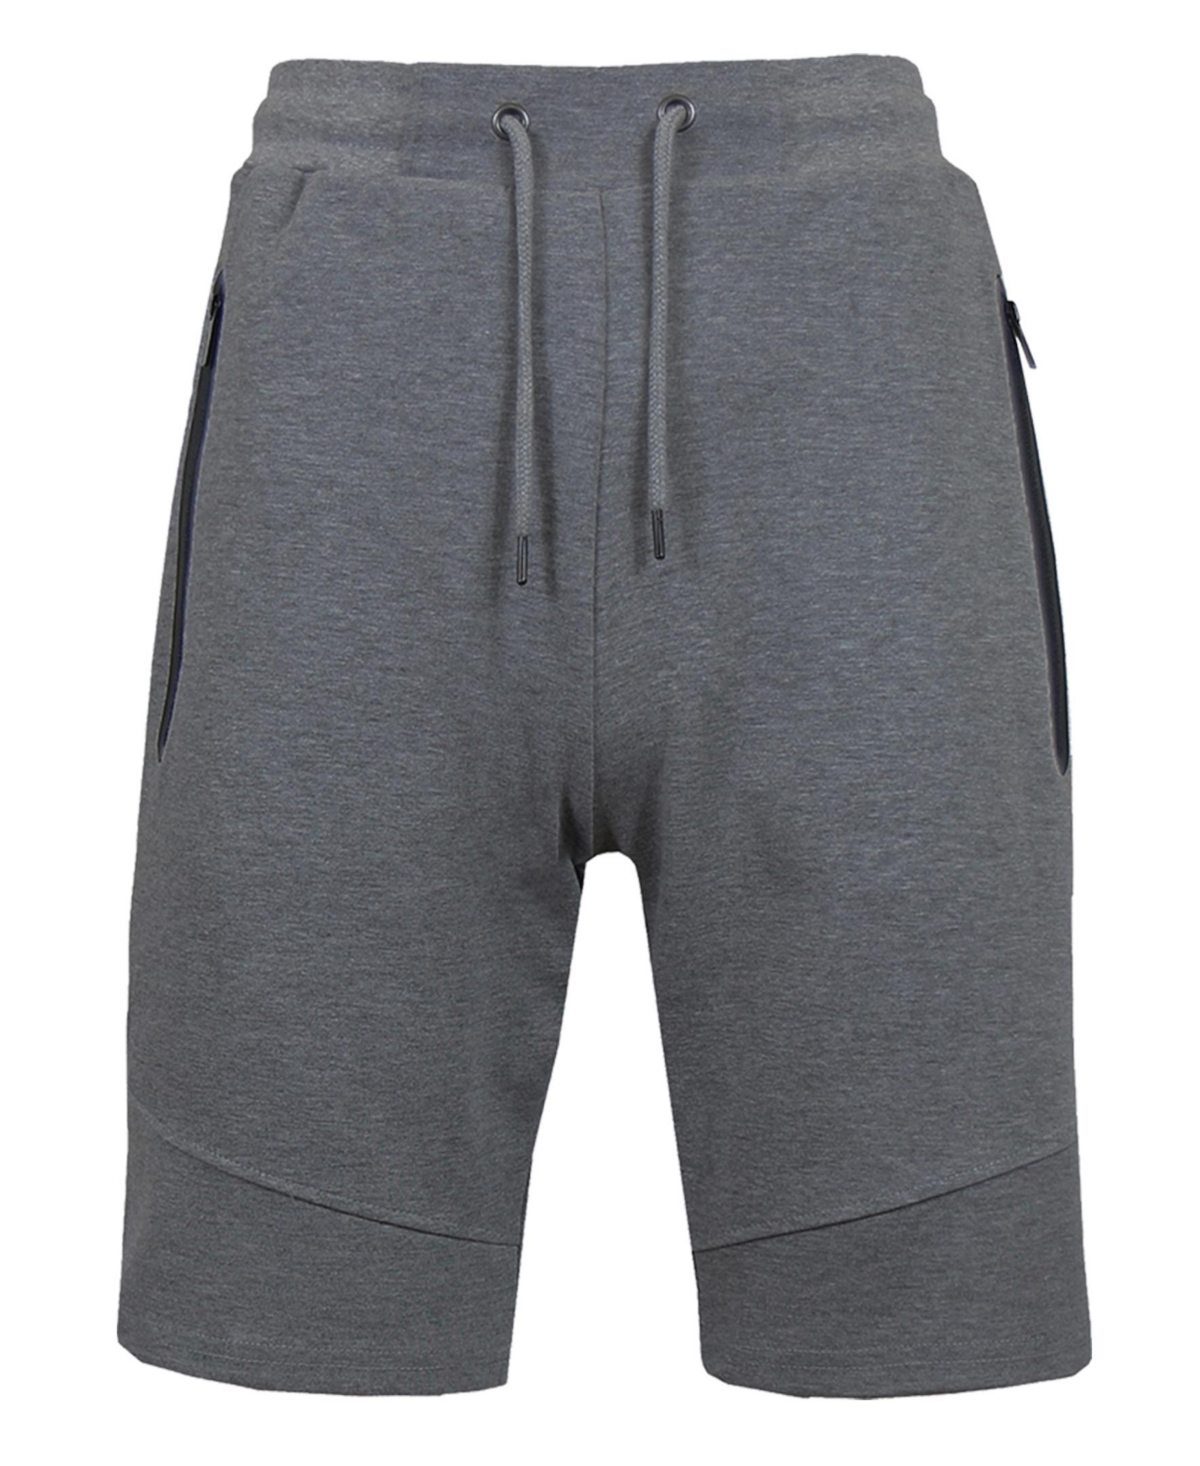 Wicked Stitch Men's Slim Fit Tech Fleece Performance Active Jogger Shorts In Charcoal